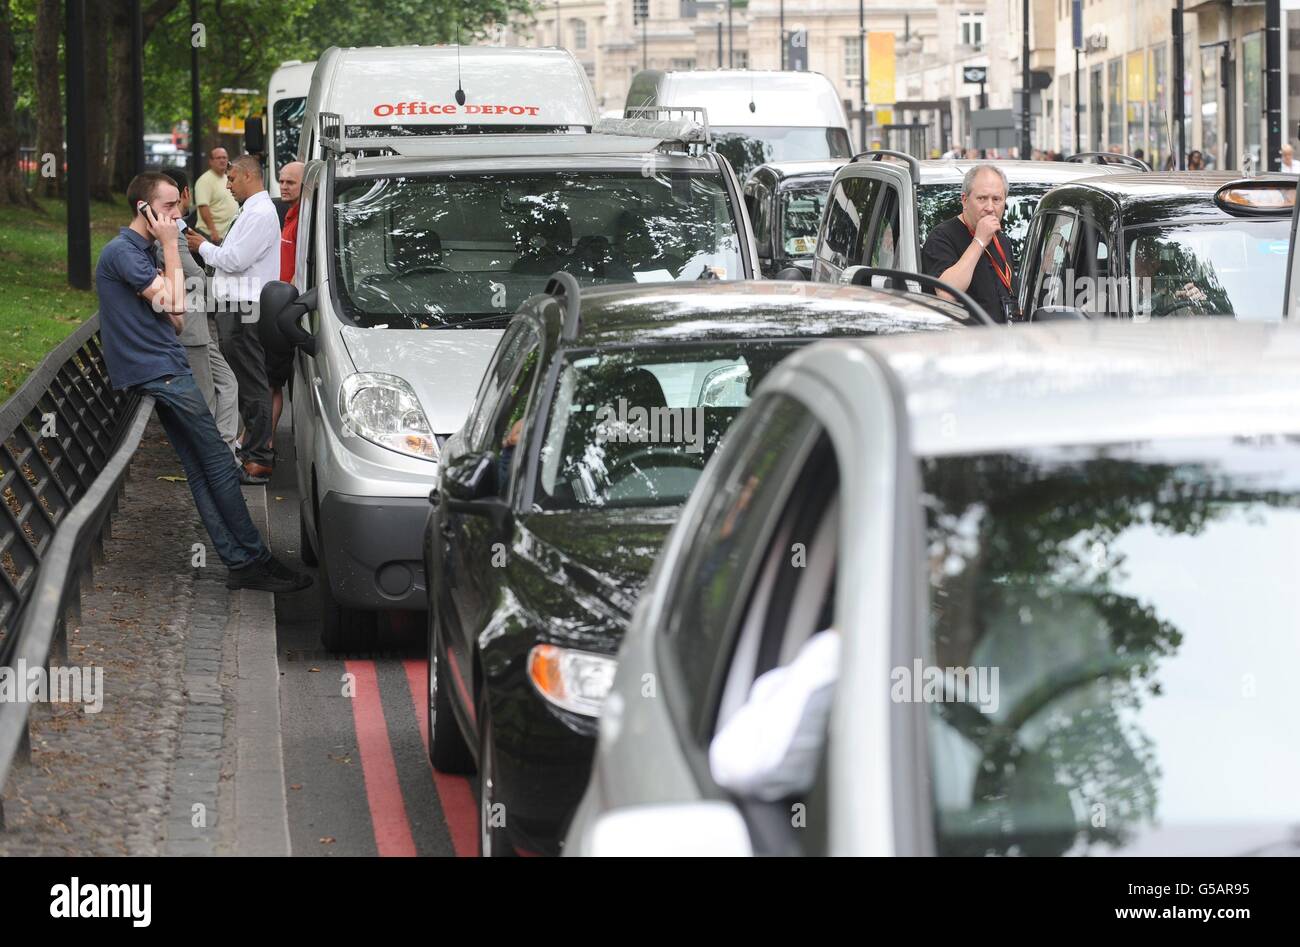 Drivers stand alongside stationary cars in a traffic jam on Park Lane in central London, as London taxi drivers protested over a ban on using Olympic traffic lanes. Stock Photo